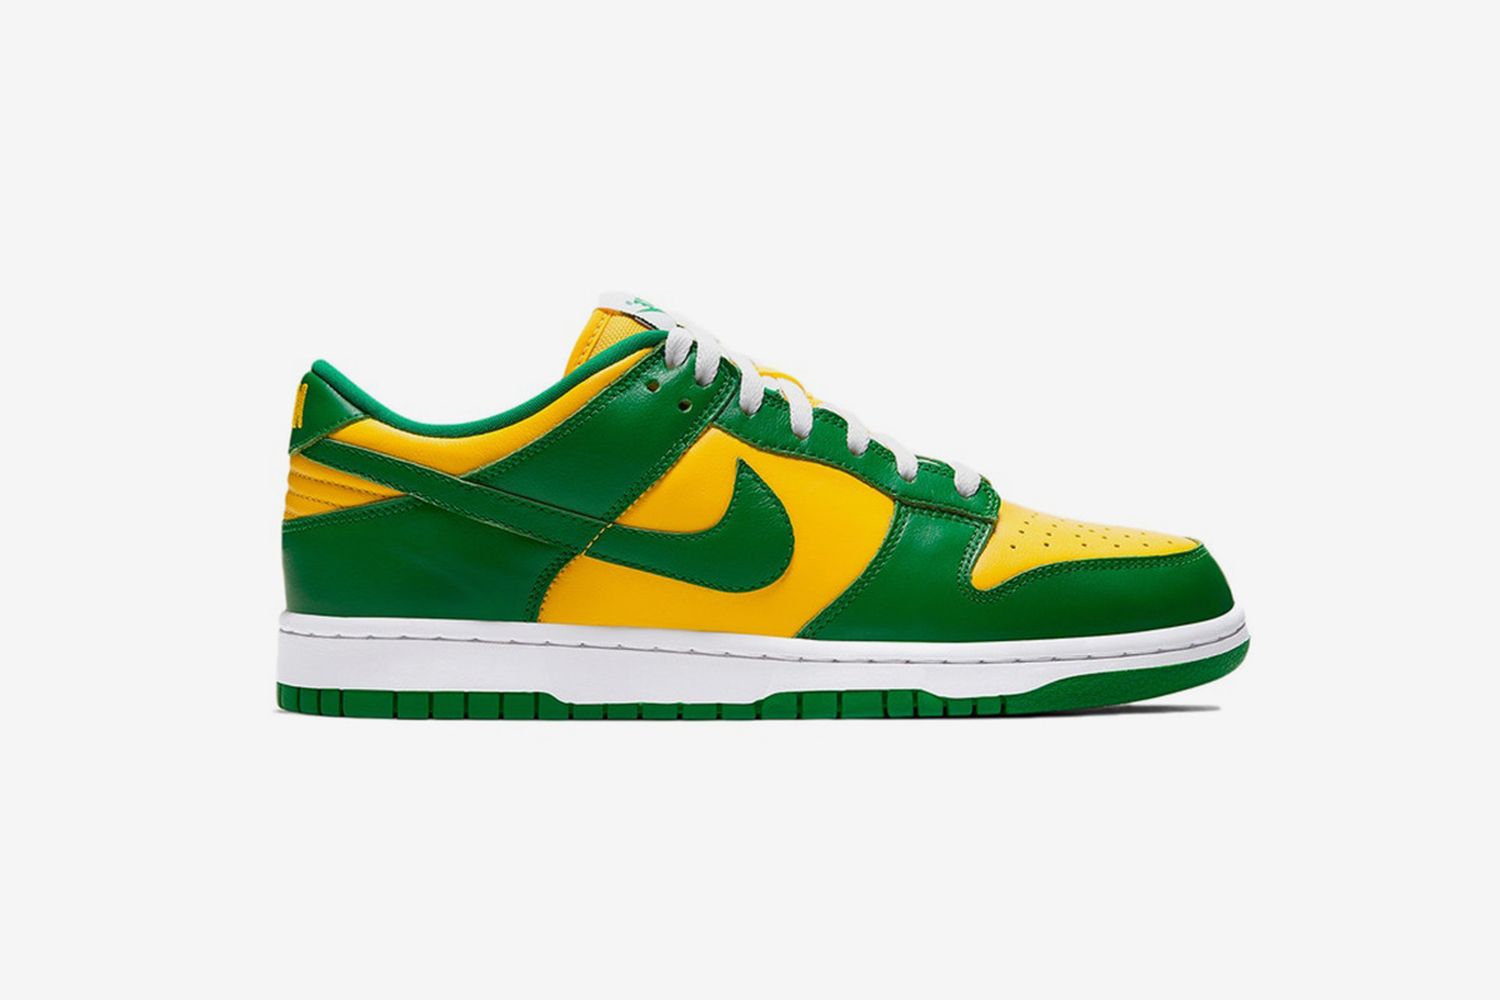 Nike SB Dunk Low “Brazil”: Official Images & Where to Buy Tomorrow